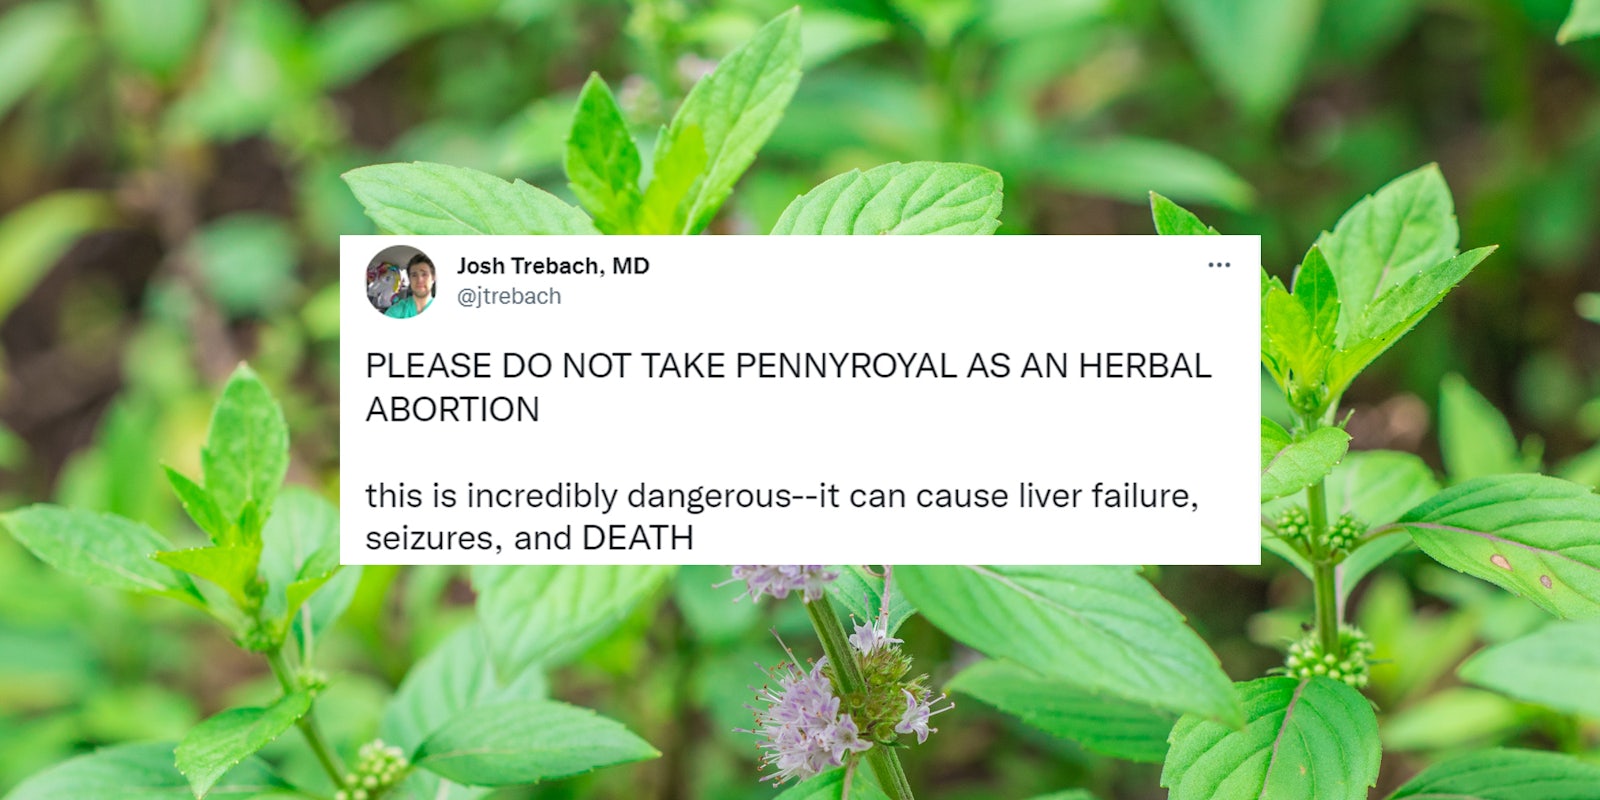 natural pennyroyal plant up close tweet by Josh Trebach MD cantered caption 'PLEASE DO NOT TAKE PENNYROYAL AS AN HERBAL ABORTION this is incredibly dangerous-- it can lead to liver failure, seizures, and DEATH'